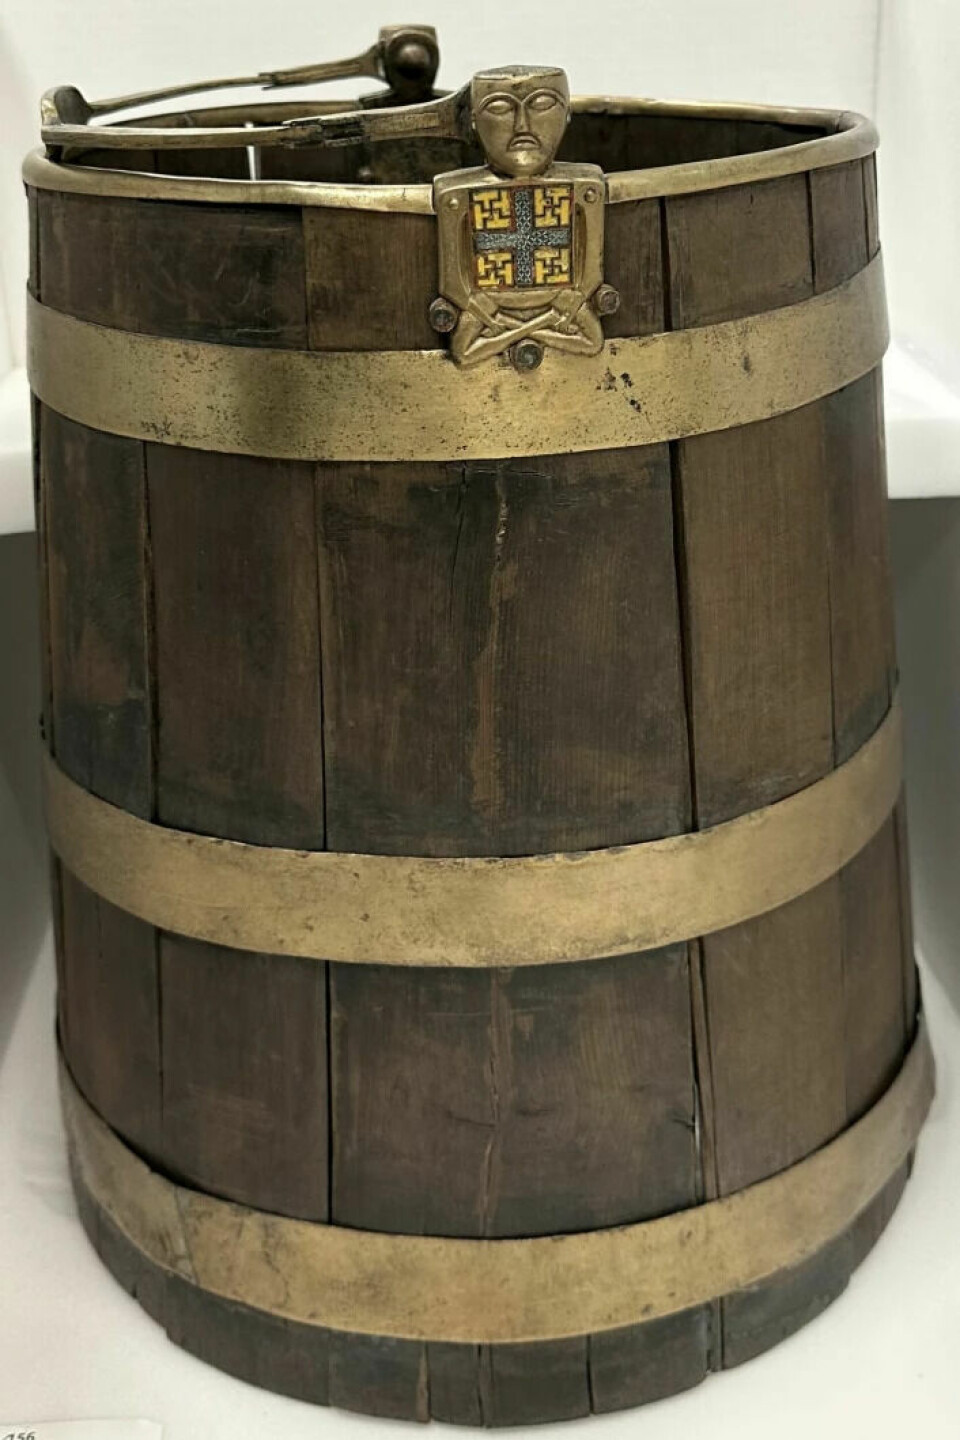 The bucket is crafted from yew and bronze.